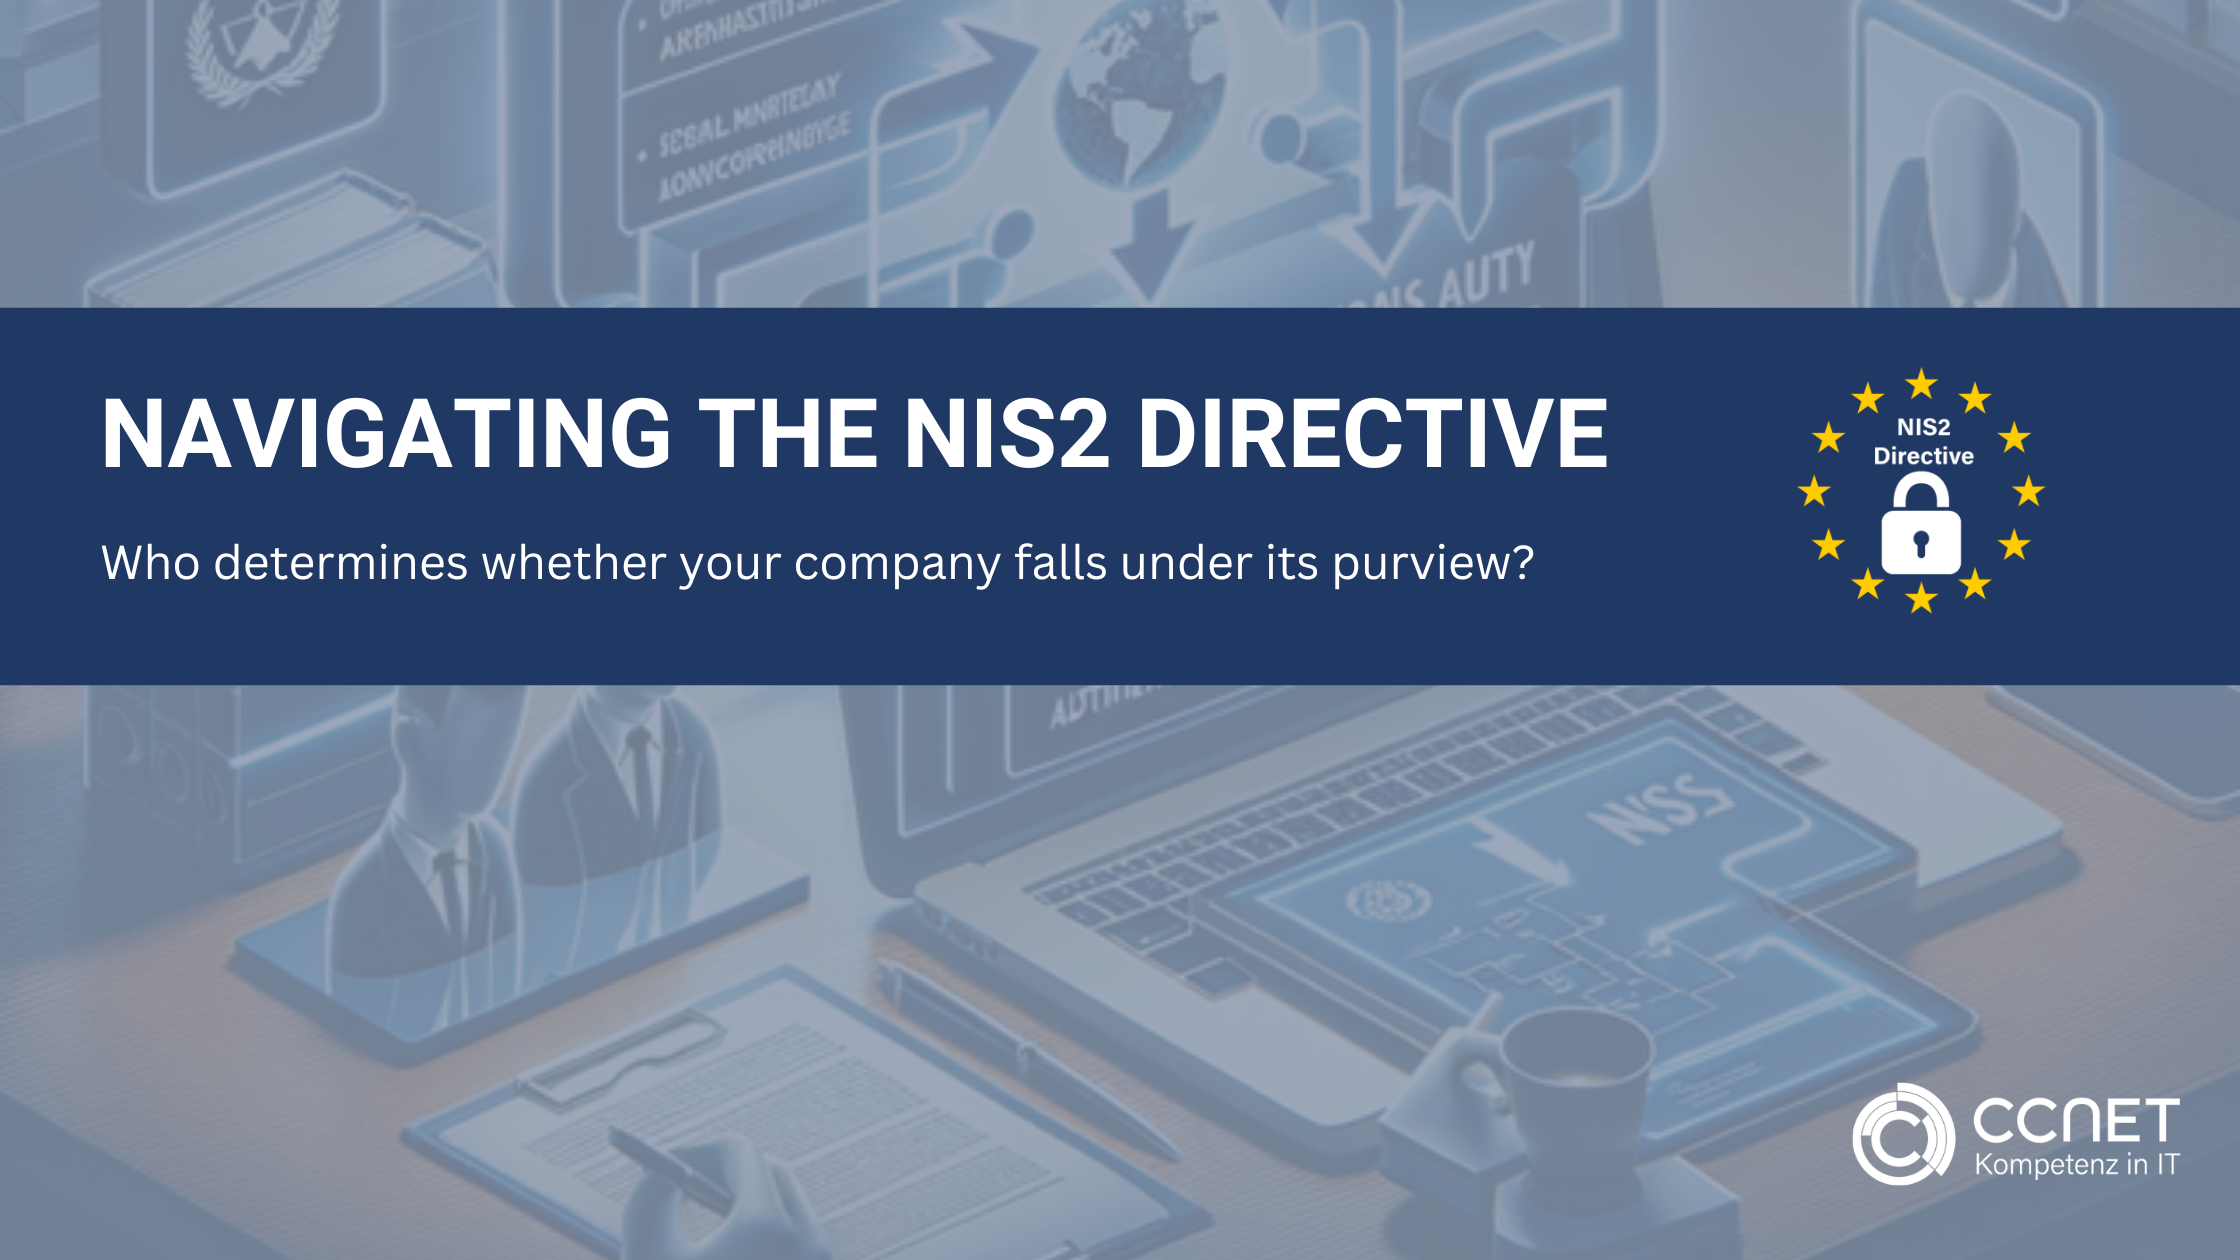 Navigating The NIS2 Directive - who determines wether your company falls under its purview?